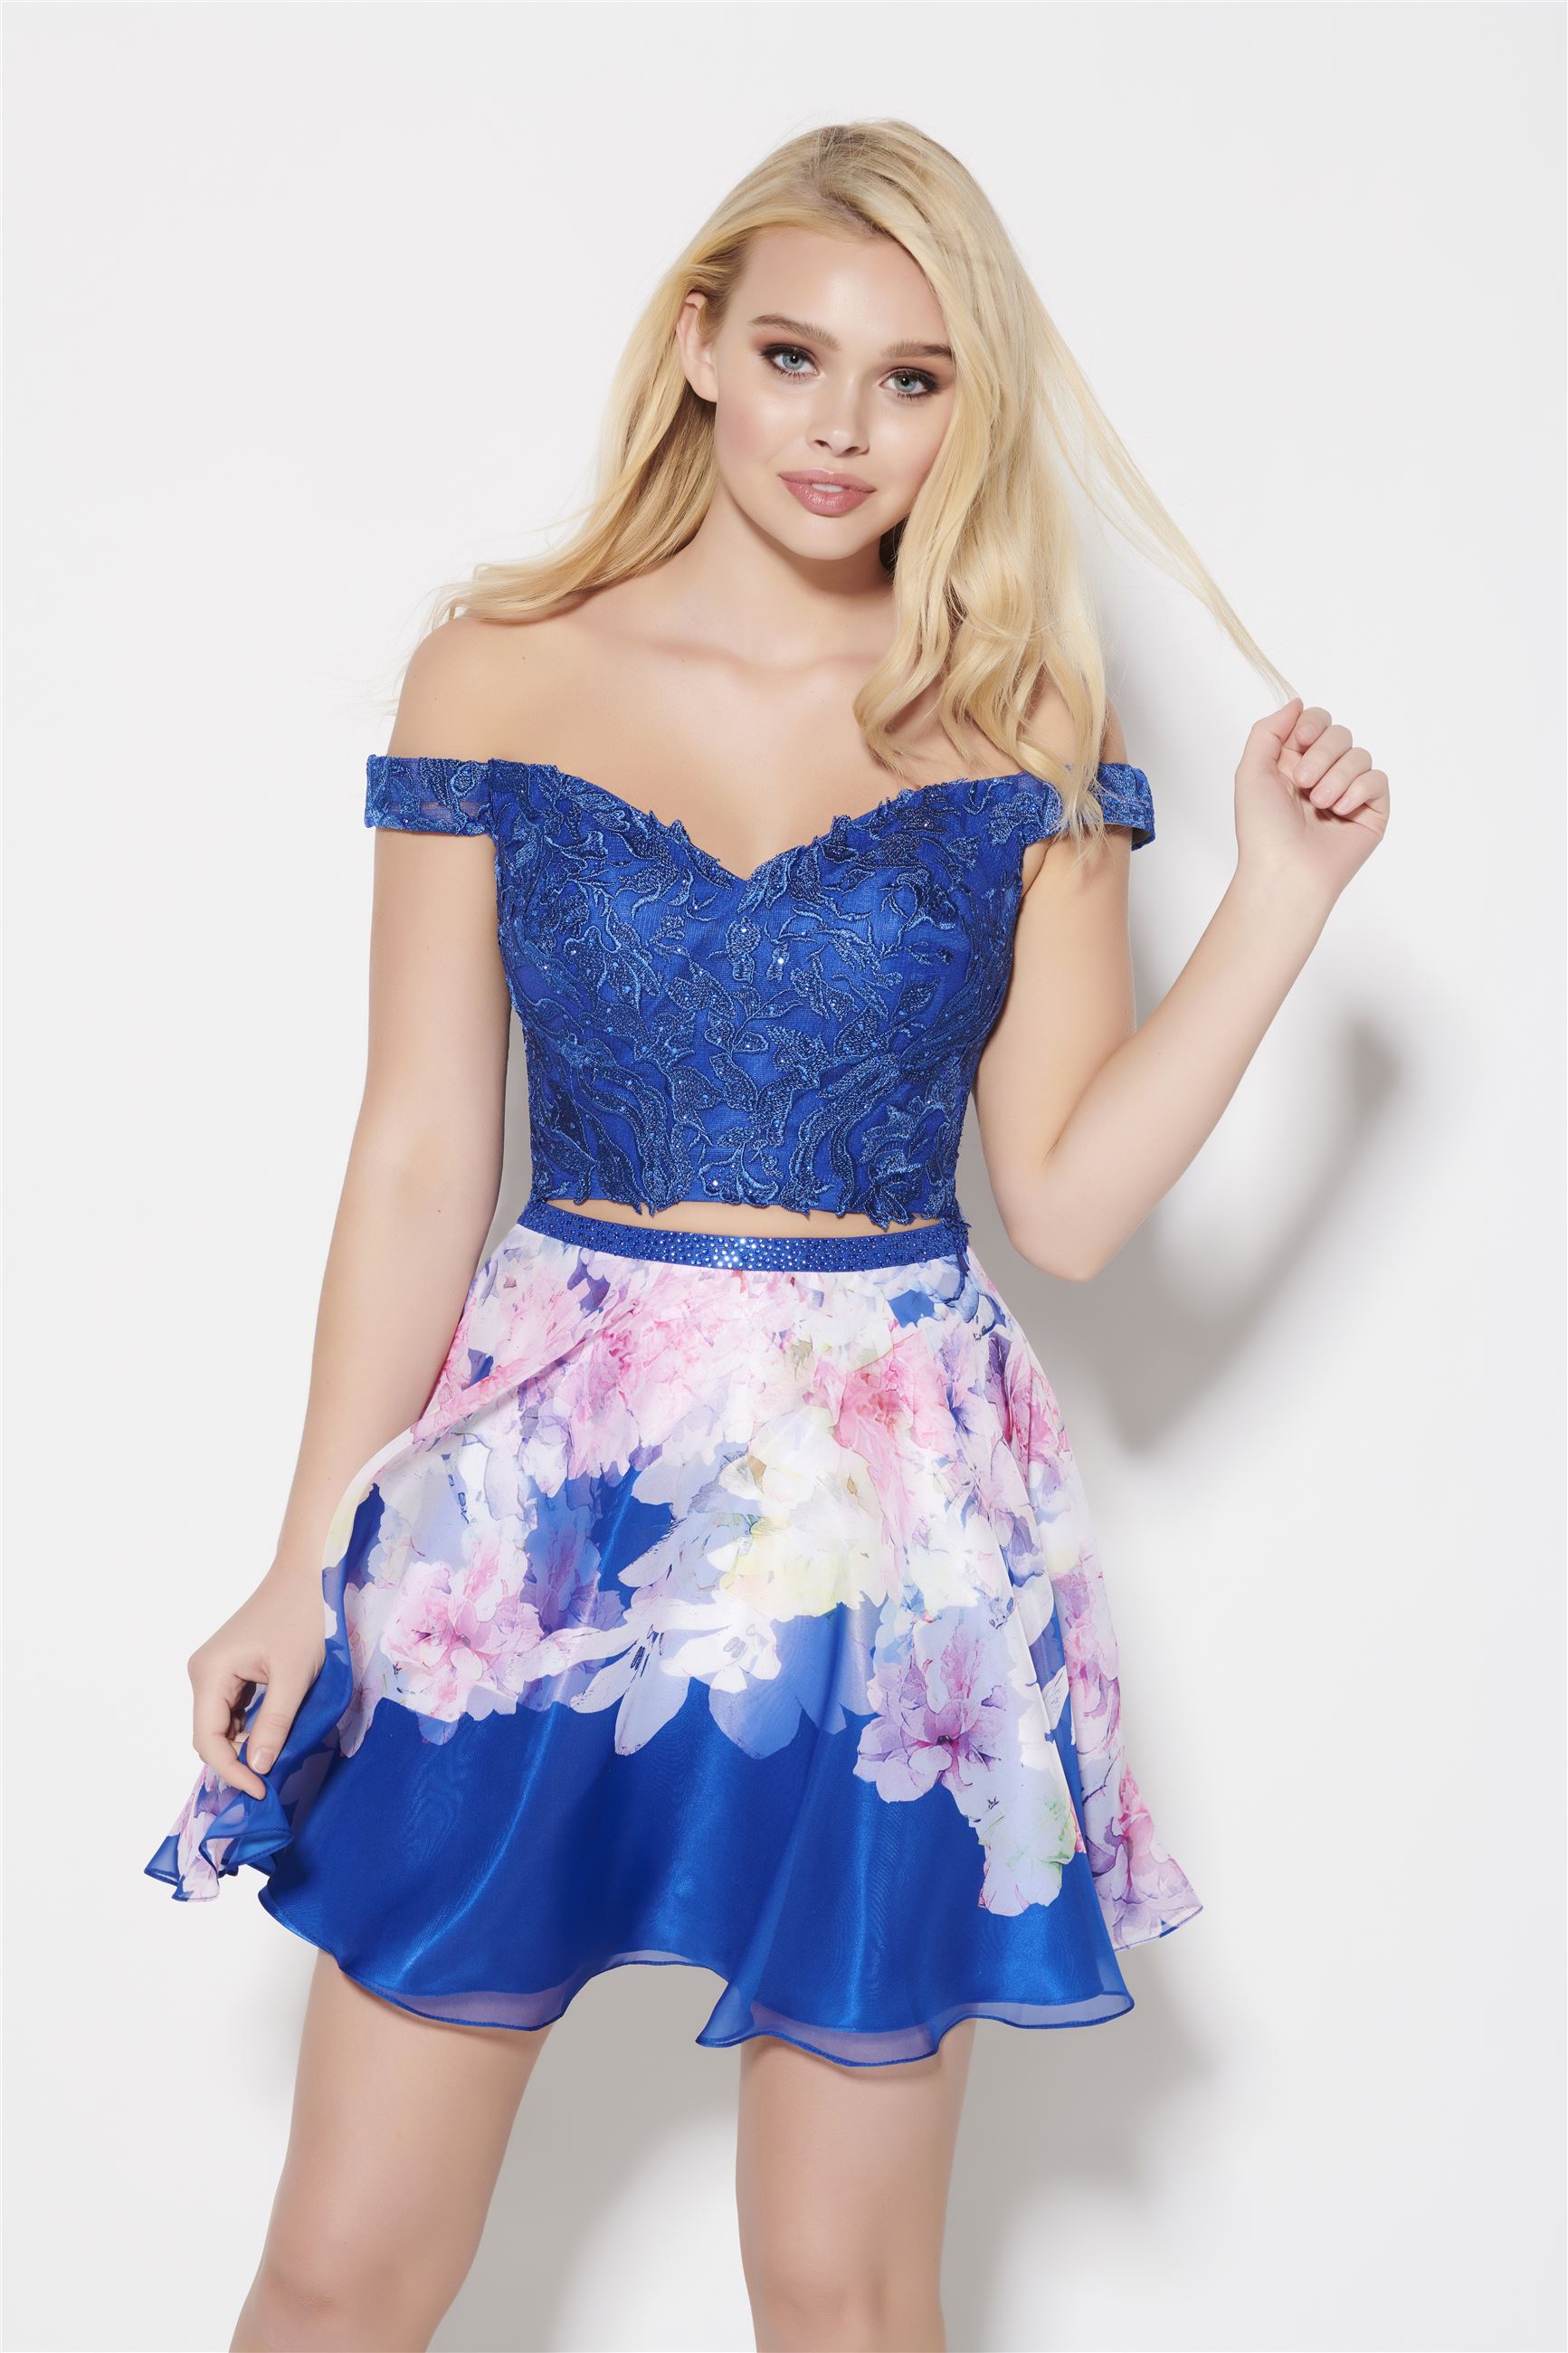 Blonde girl in blue two piece homecoming dress